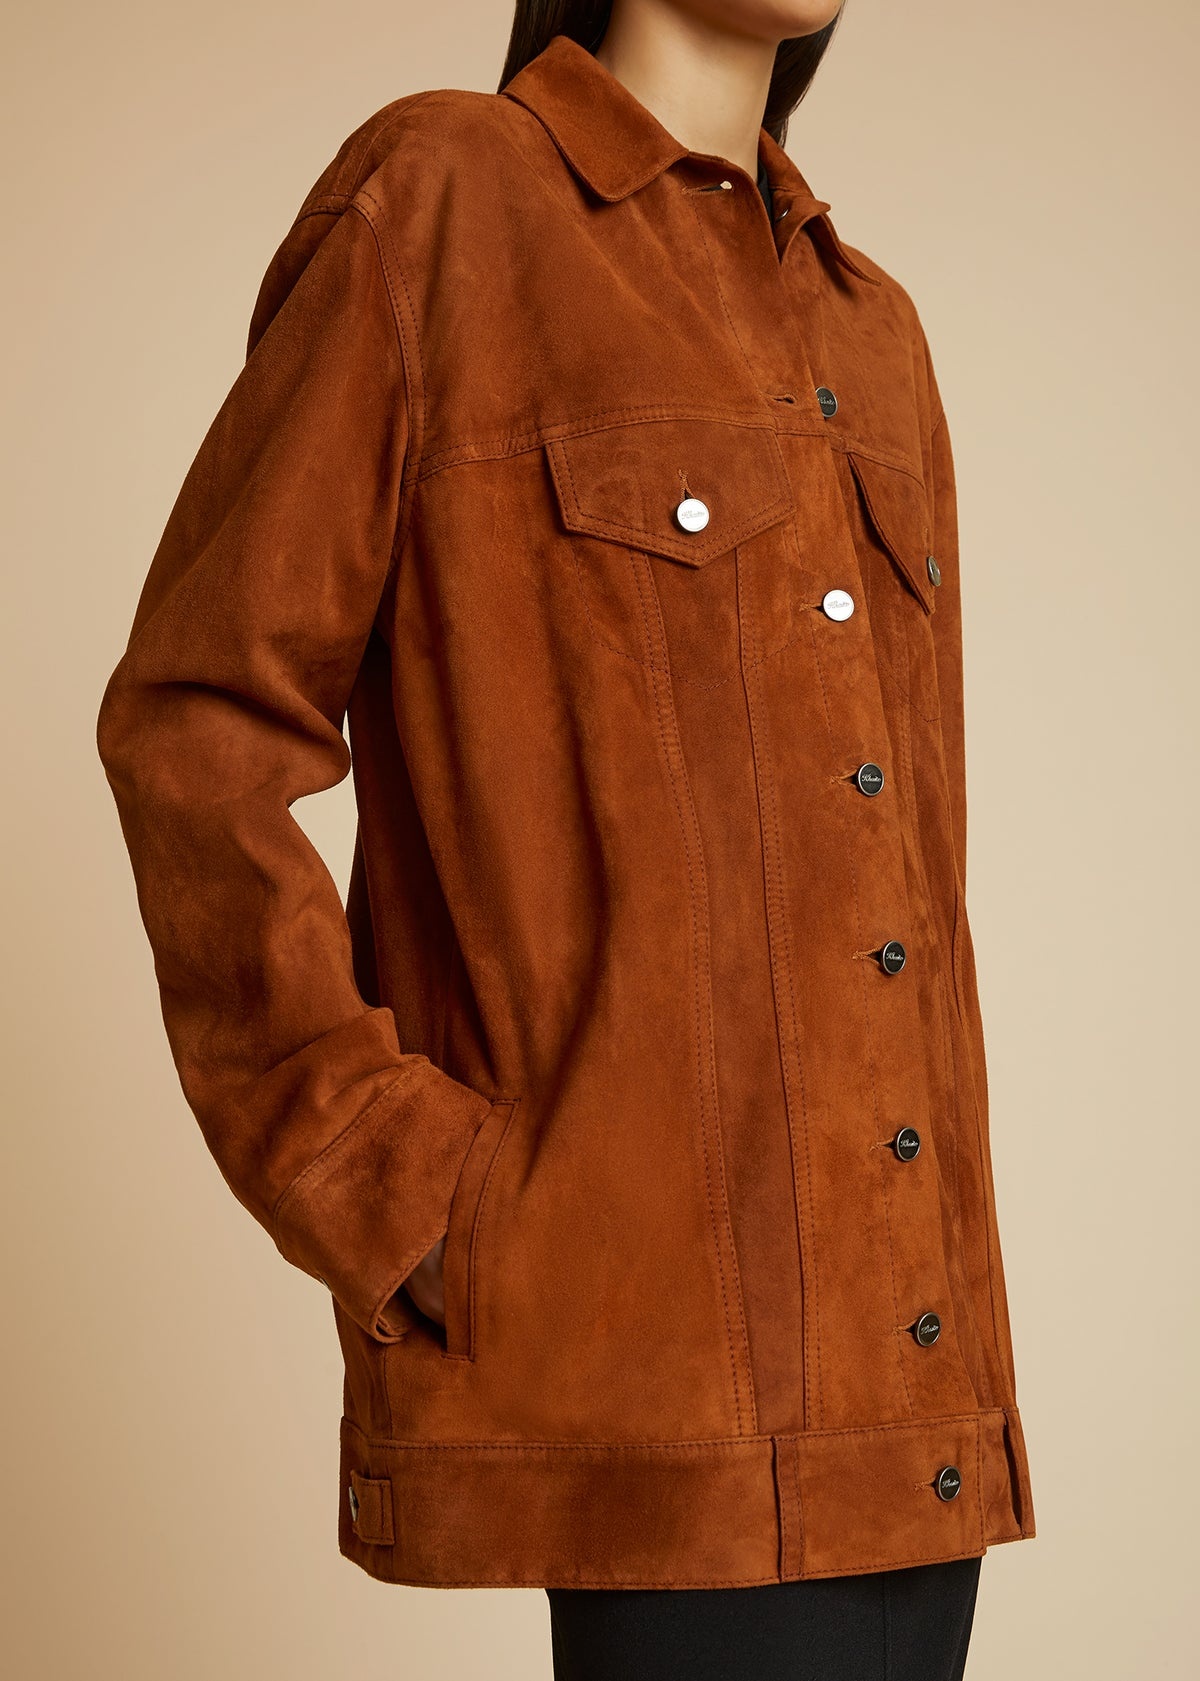 The Ross Jacket in Rust Suede - 4